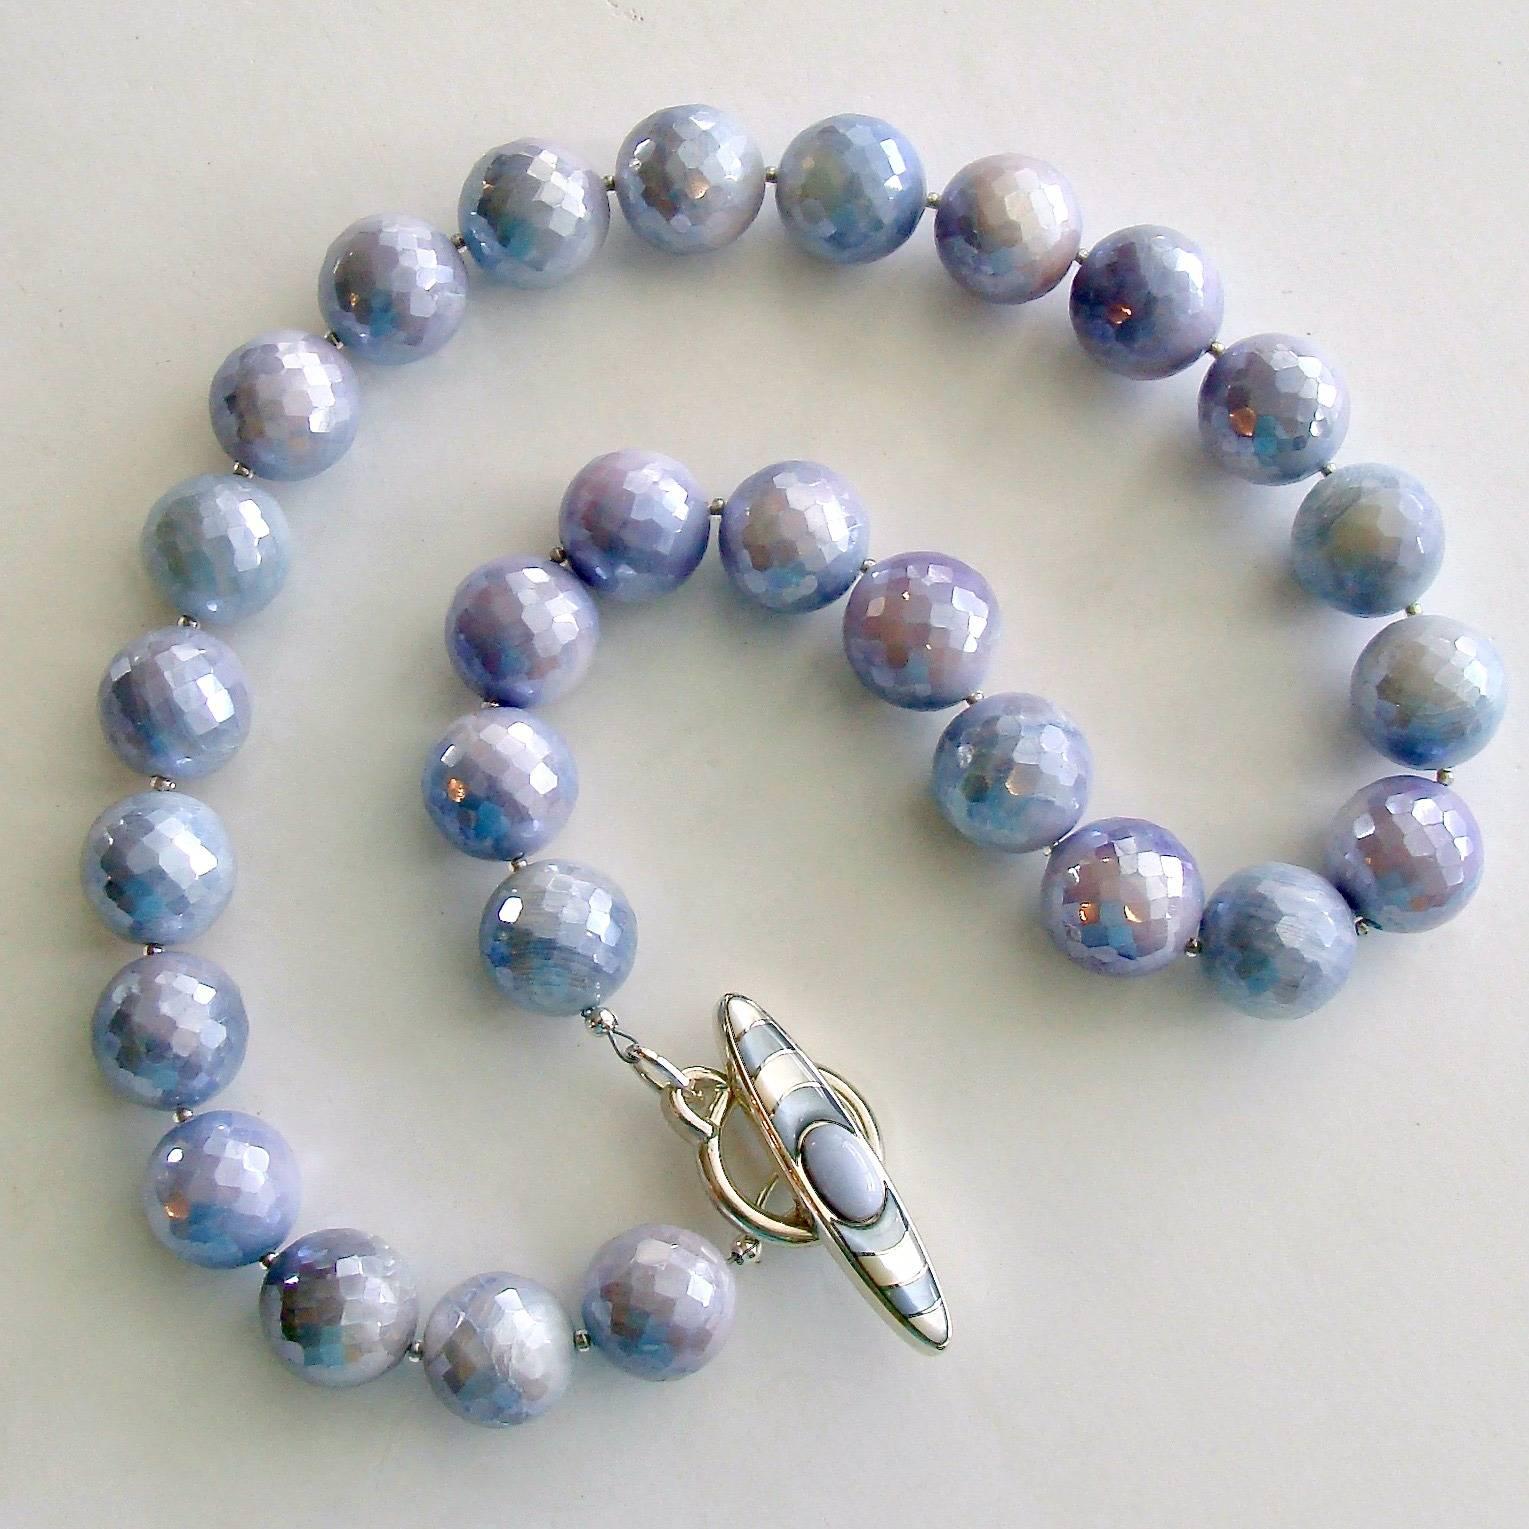 Violet Necklace.

These jaw dropping 15mm faceted mystic lavender moonstone beads are certain to call attention to your exquisite taste.  The gentle shading of these stones from lavender to violet to periwinkle blue is the hallmark of an elegant